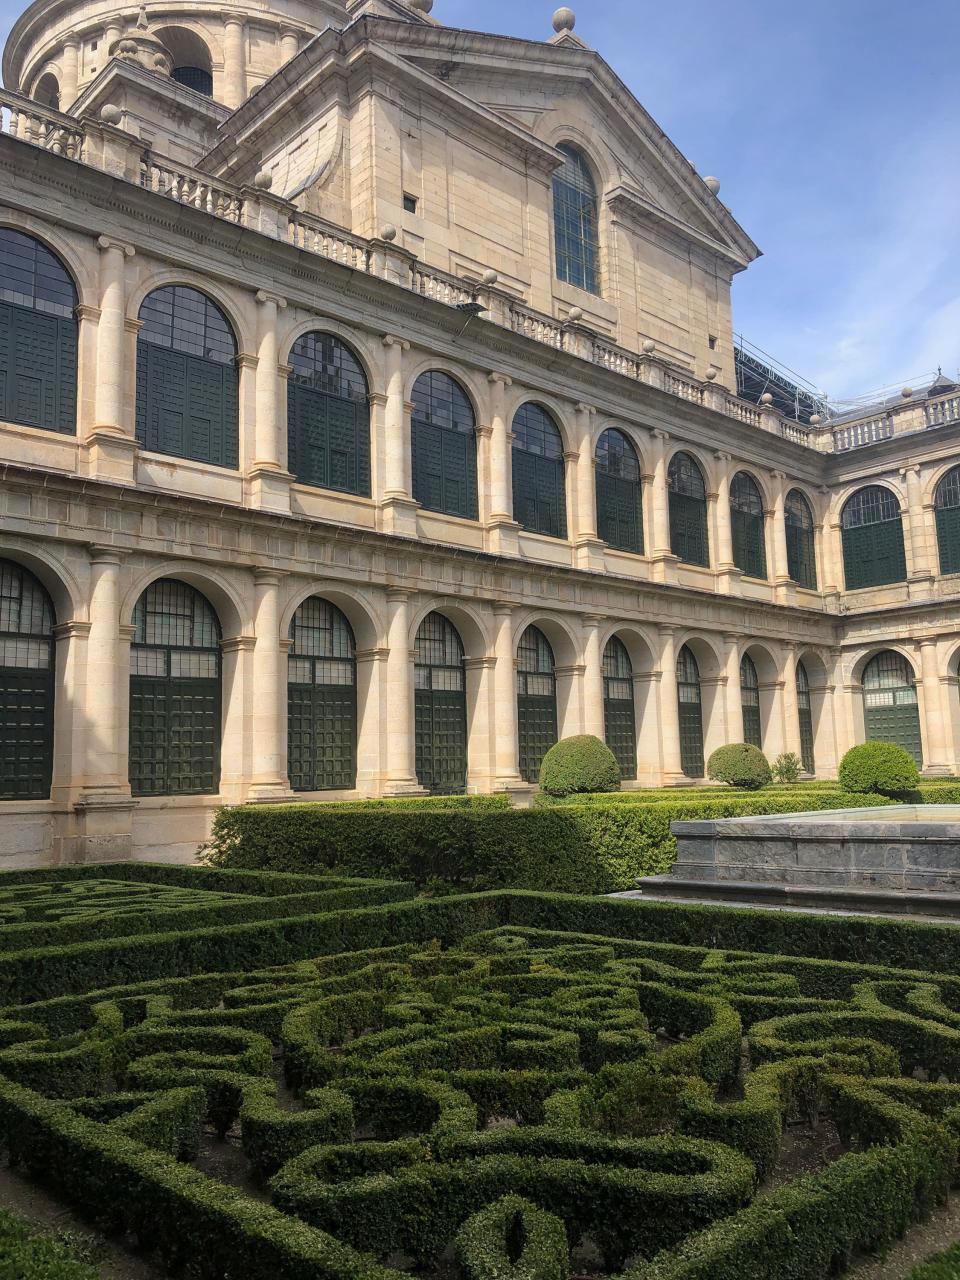 A view of the gardens at the Royal Monastery of San Lorenzo de El Escorial, about an hour outside of Madrid's city center.